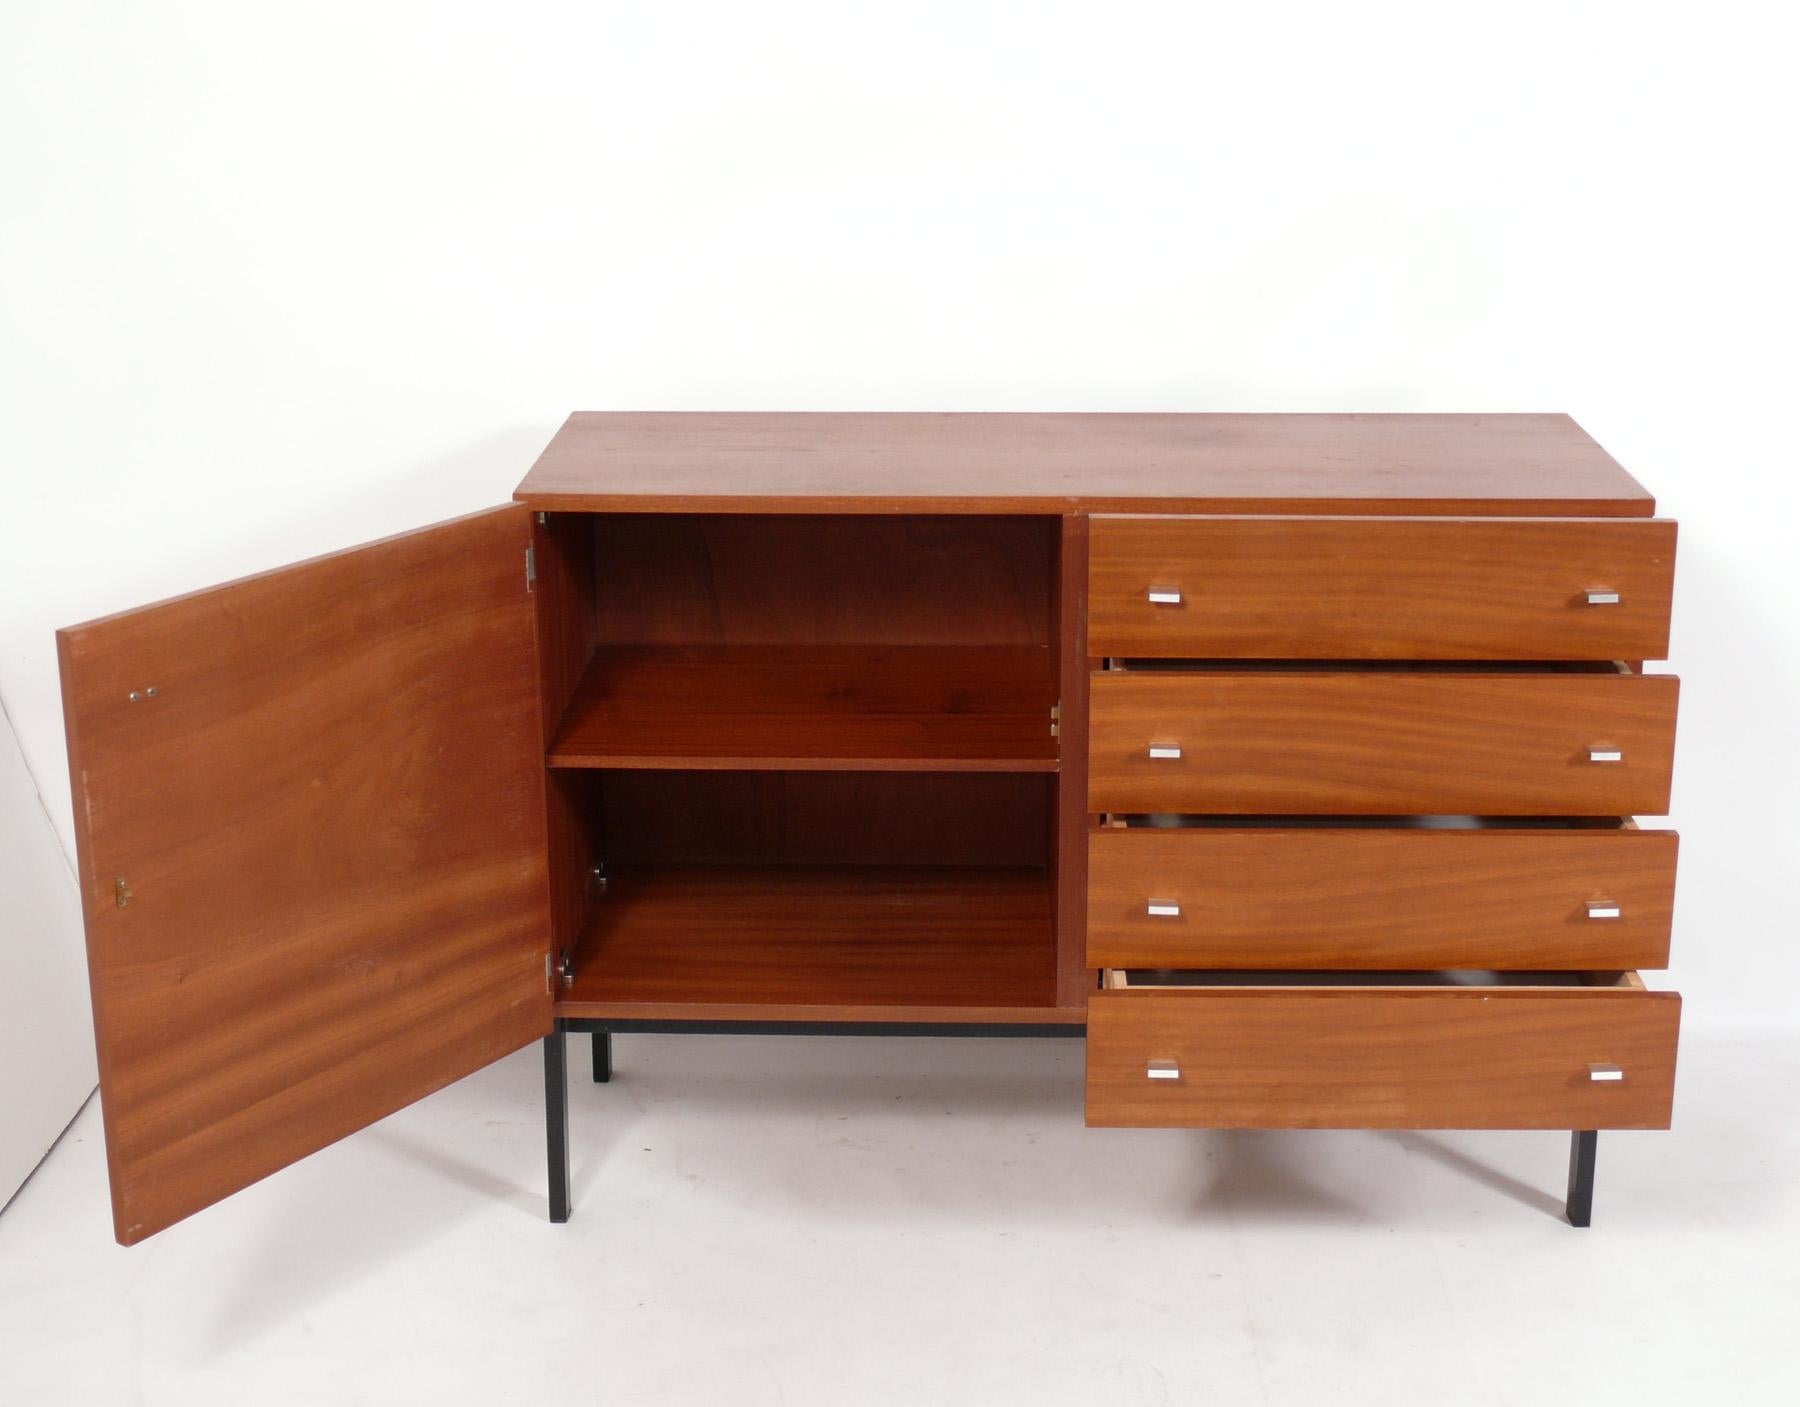 Danish Modern Credenza or Chest, Denmark, circa 1960s. This piece is a versatile size and can be used as a credenza, cabinet, server, or bar in a living area, or as a chest or dresser in a bedroom. It offers a voluminous amount of storage with a